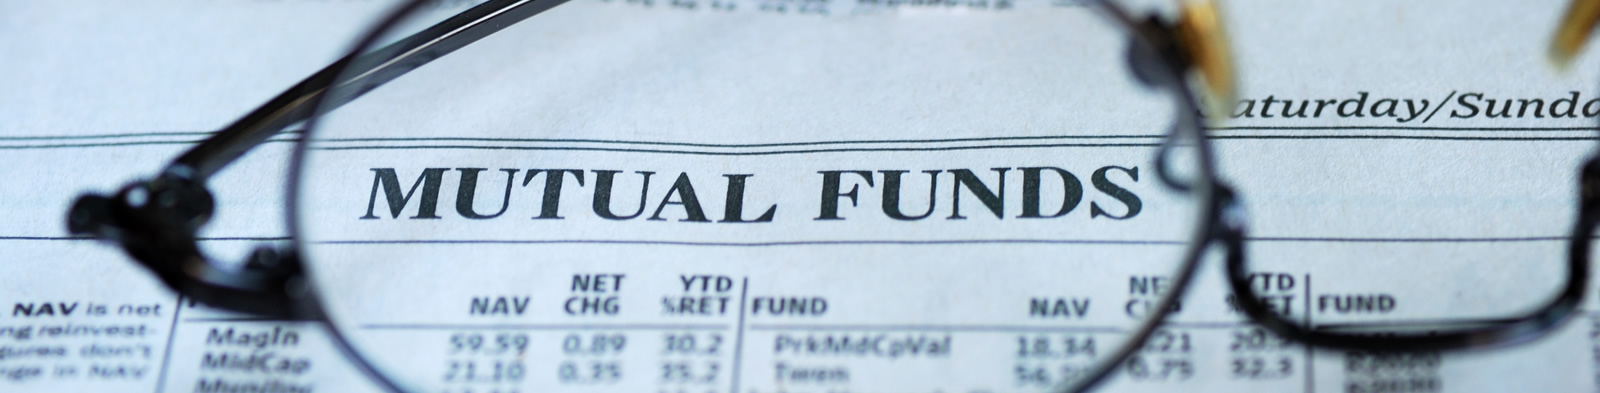 Mutual funds figures in newspaper